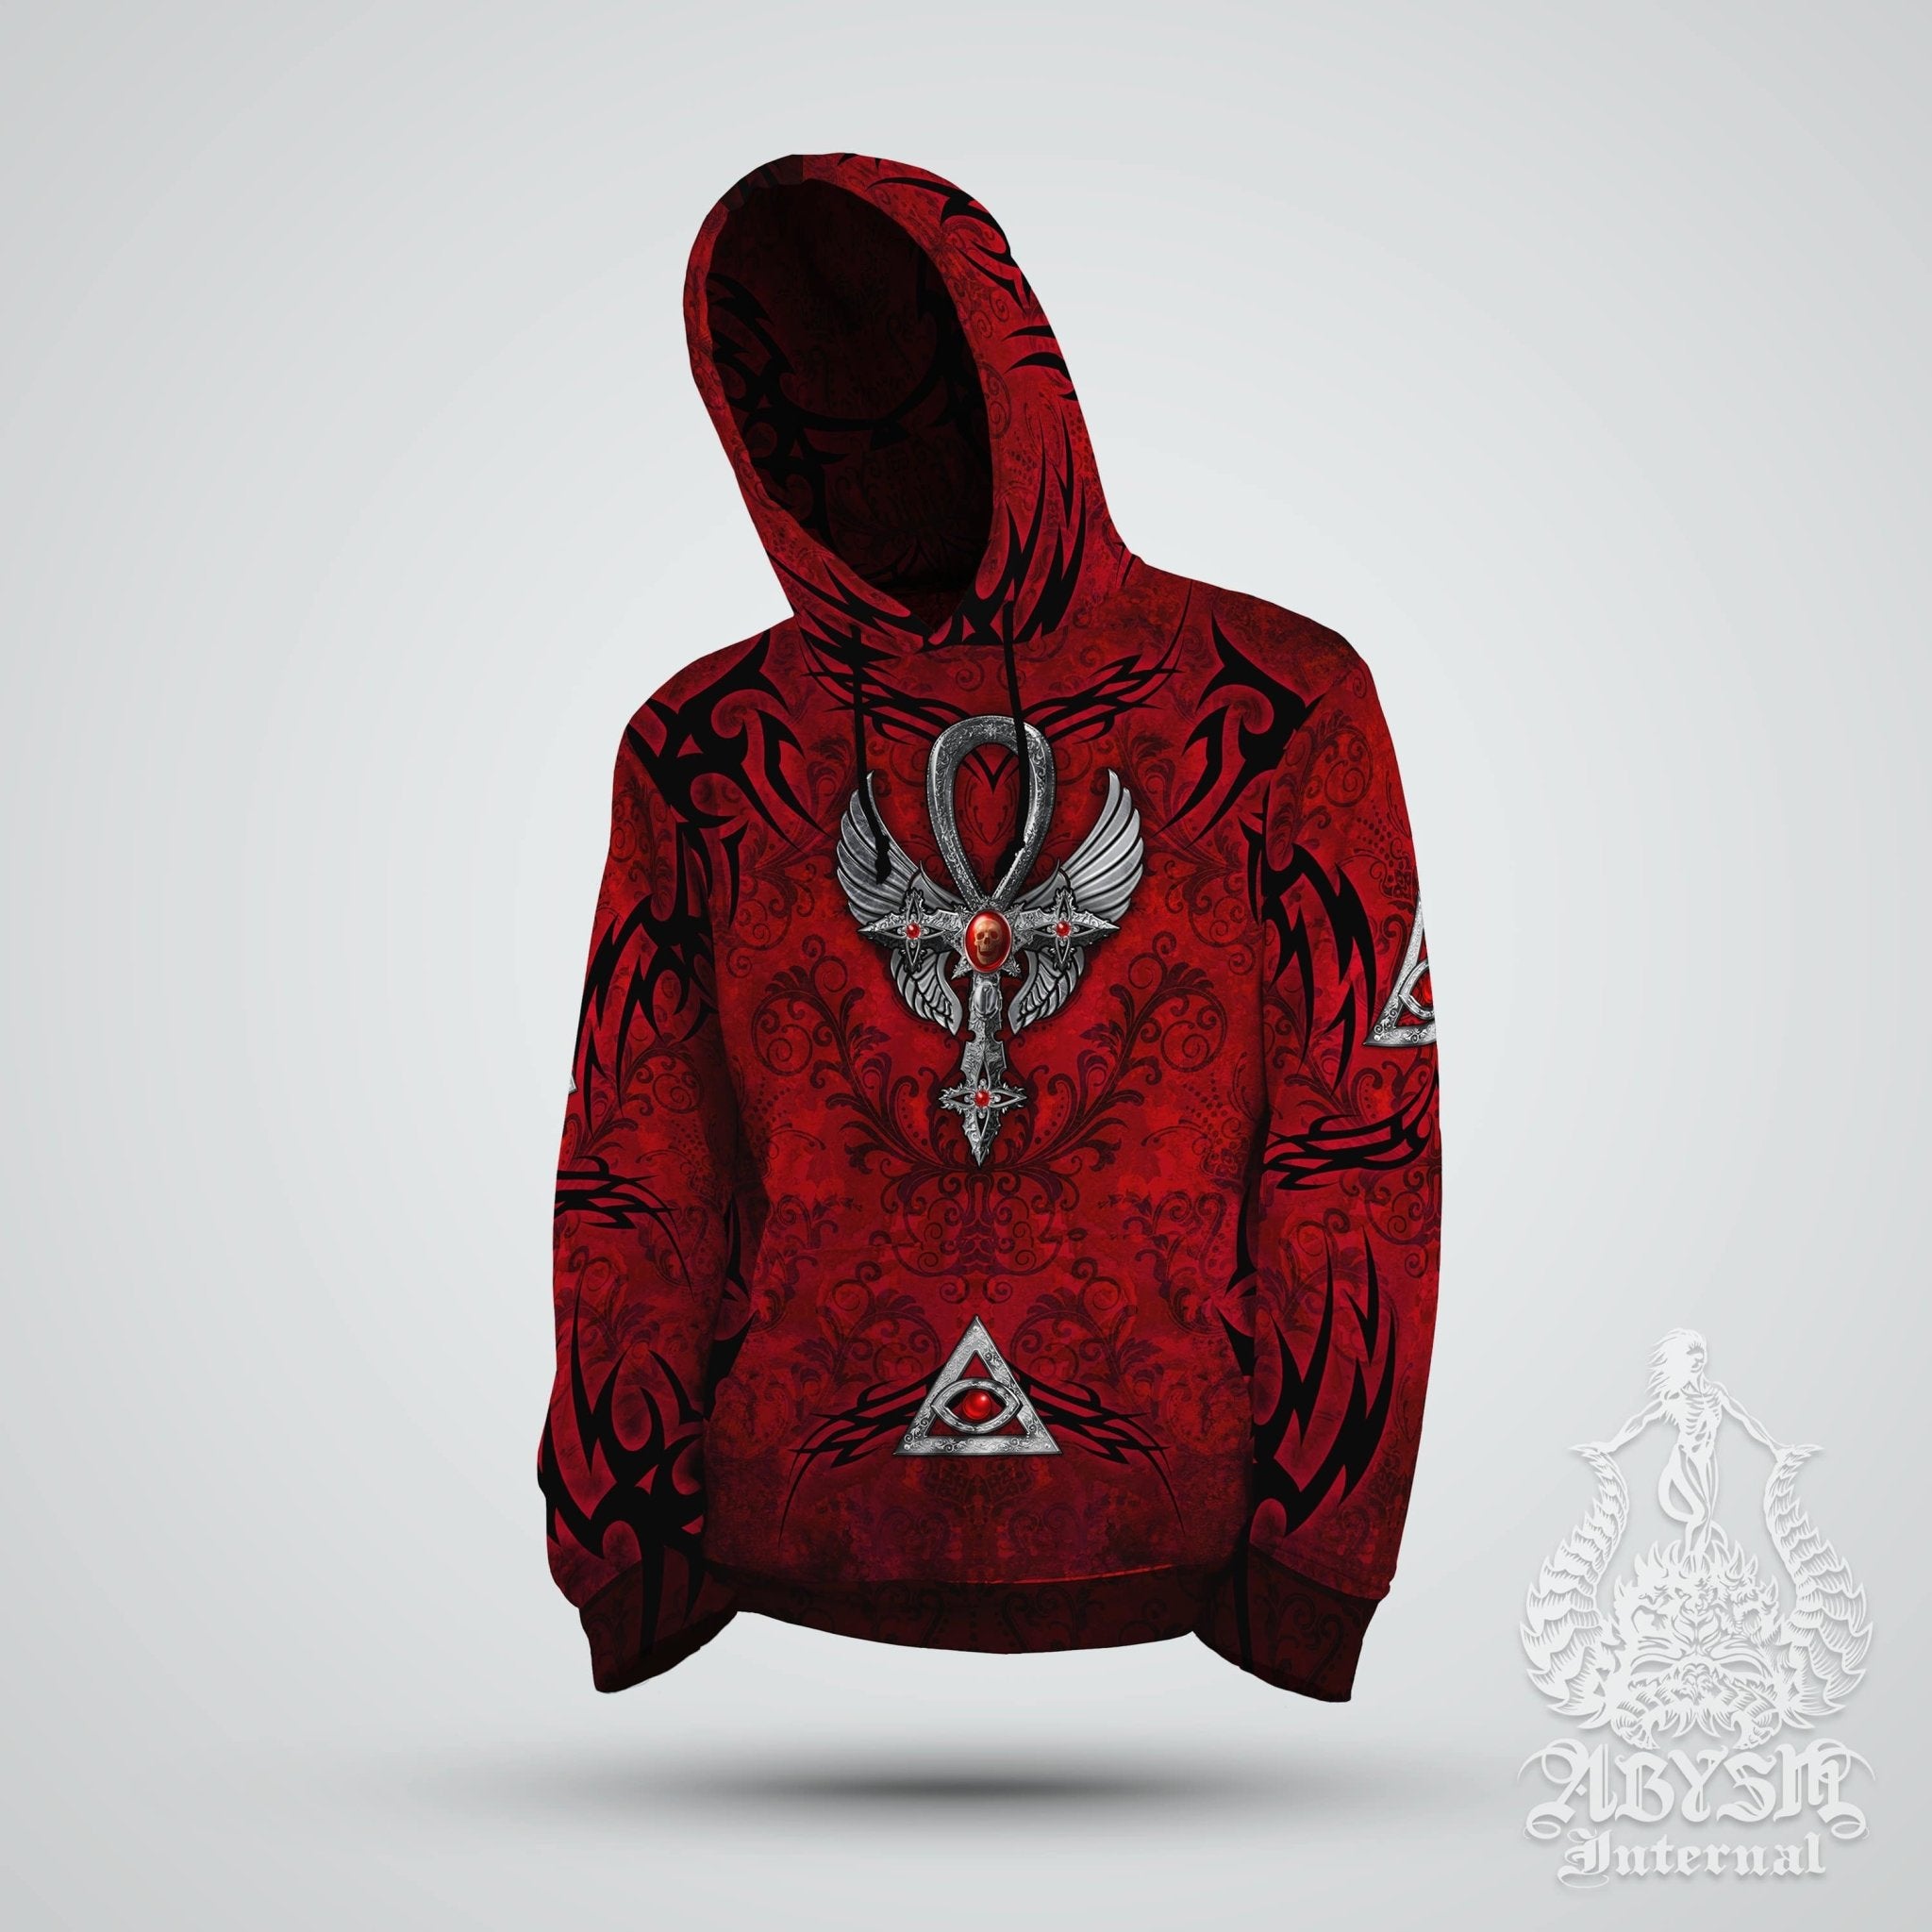 Occult Hoodie, Gothic Streetwear, Street Outfit, Goth, Alternative Clothing, Unisex - Ankh Cross, Silver Red - Abysm Internal